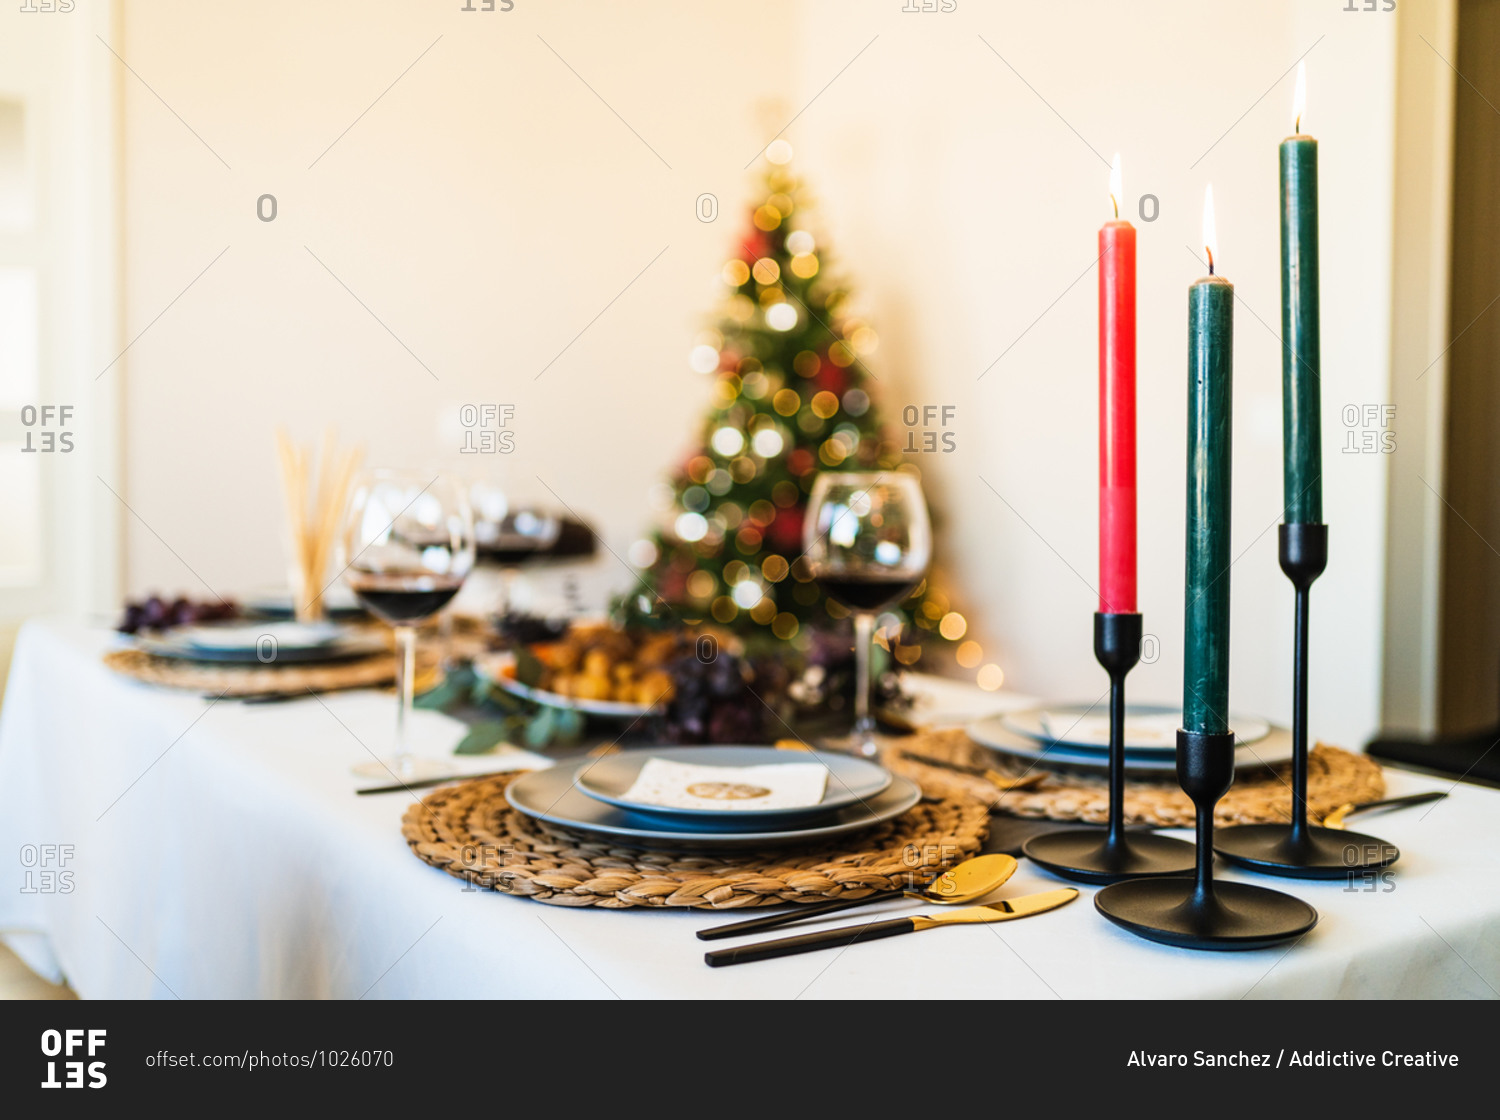 Festive table setting near decorated Christmas tree with glowing garlands before Christmas celebration party